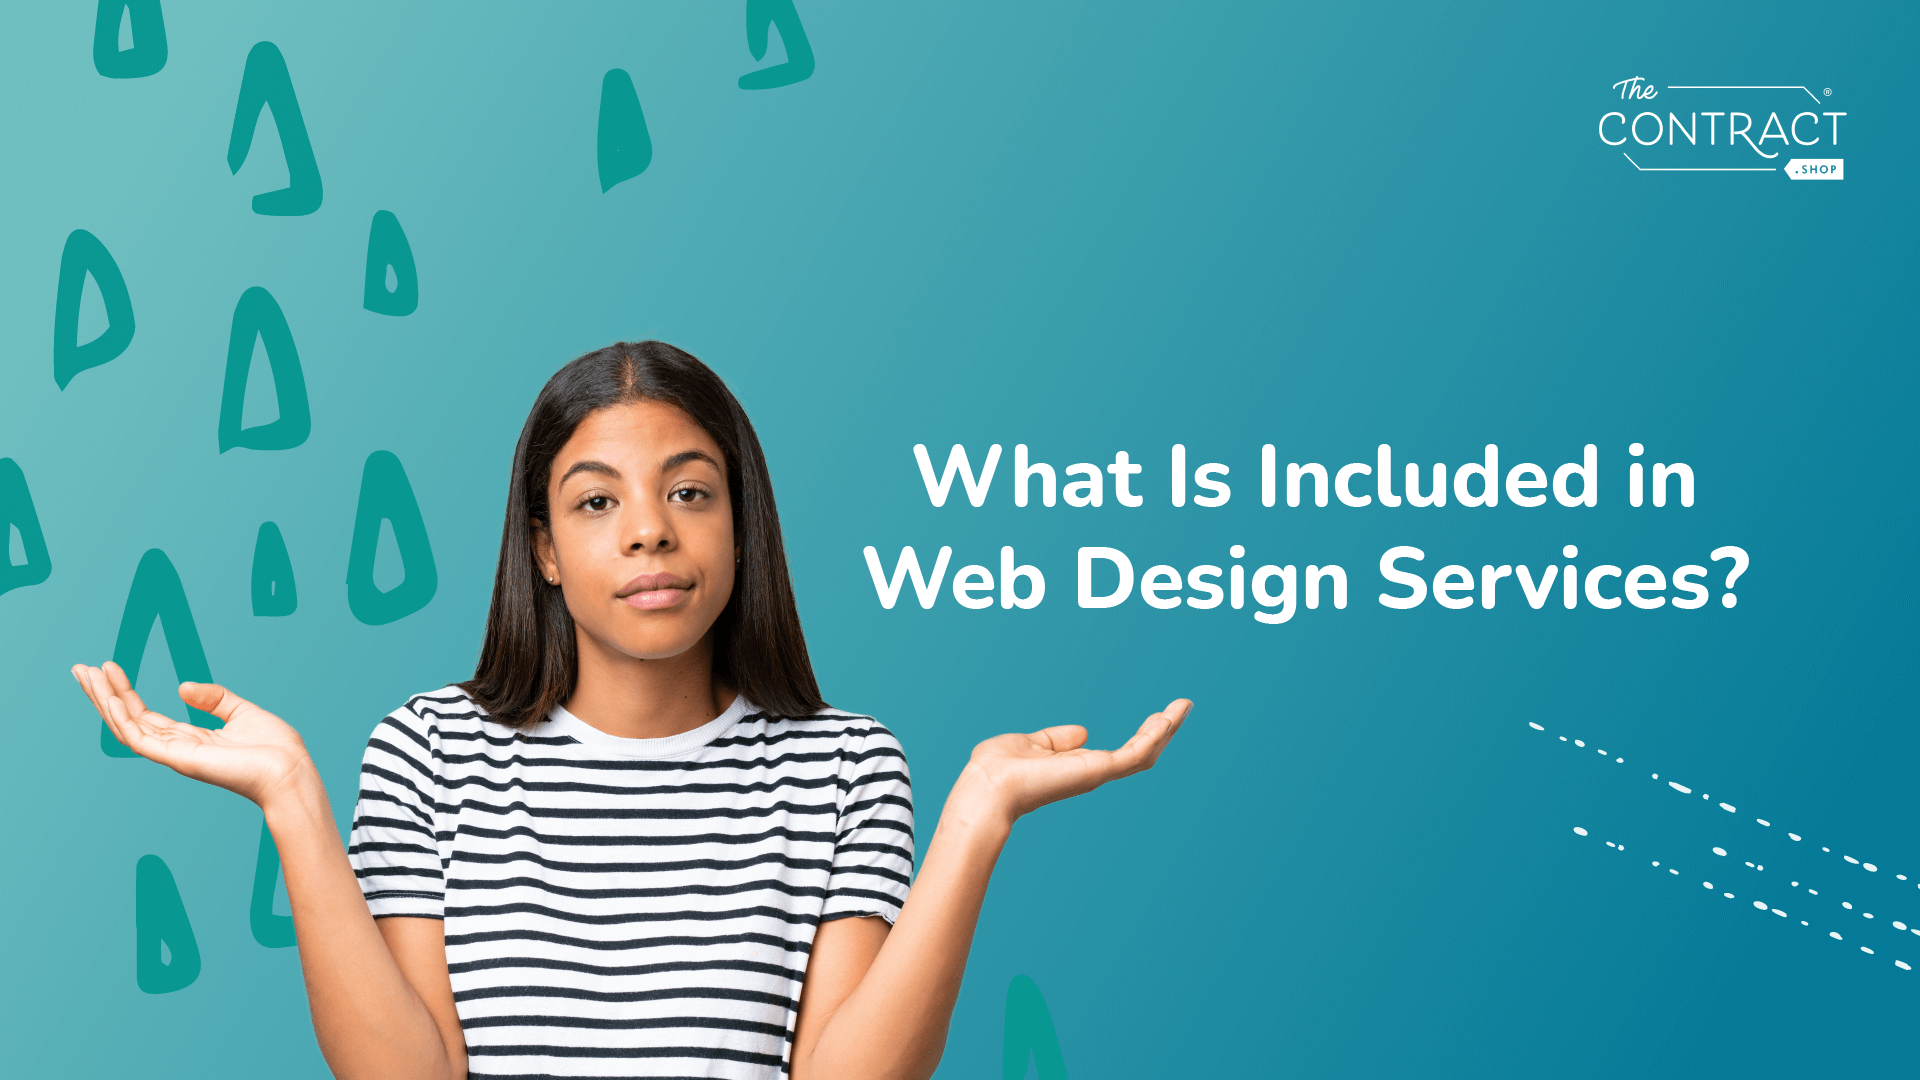 What is Included in Web Design Services?